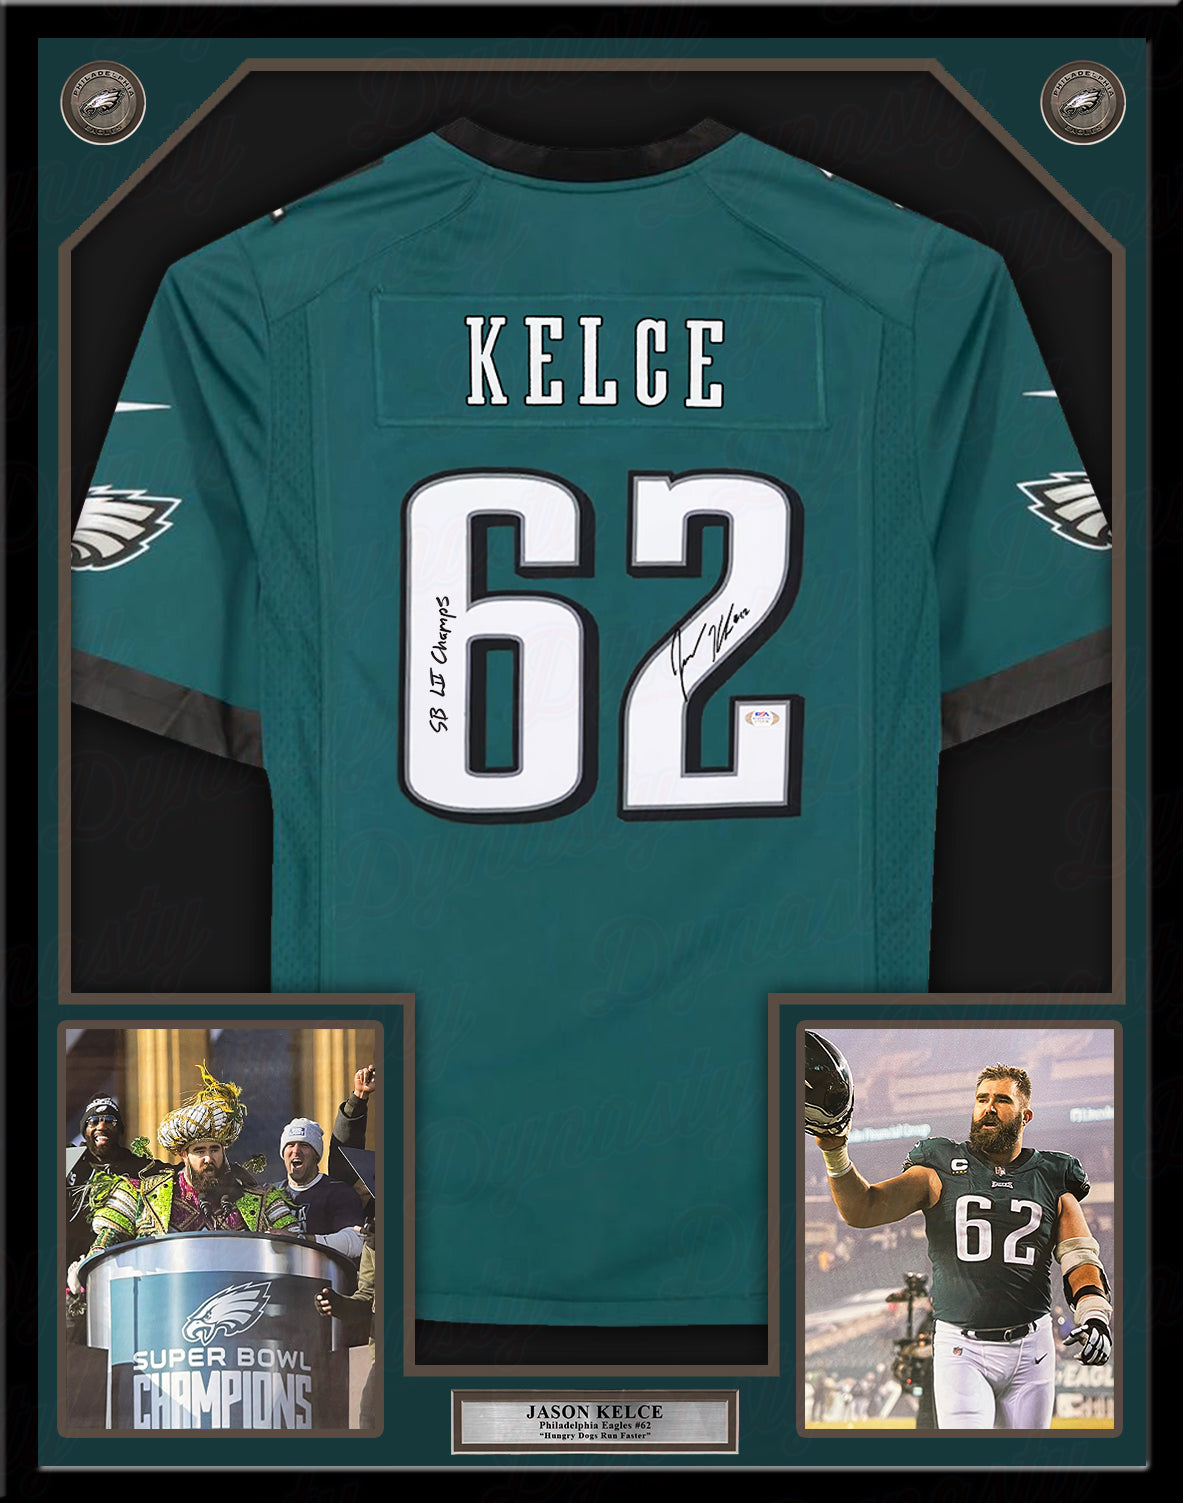 Jason Kelce Philadelphia Eagles Autographed Framed Green Nike Game Jersey with SB Champs Inscription - Dynasty Sports & Framing 